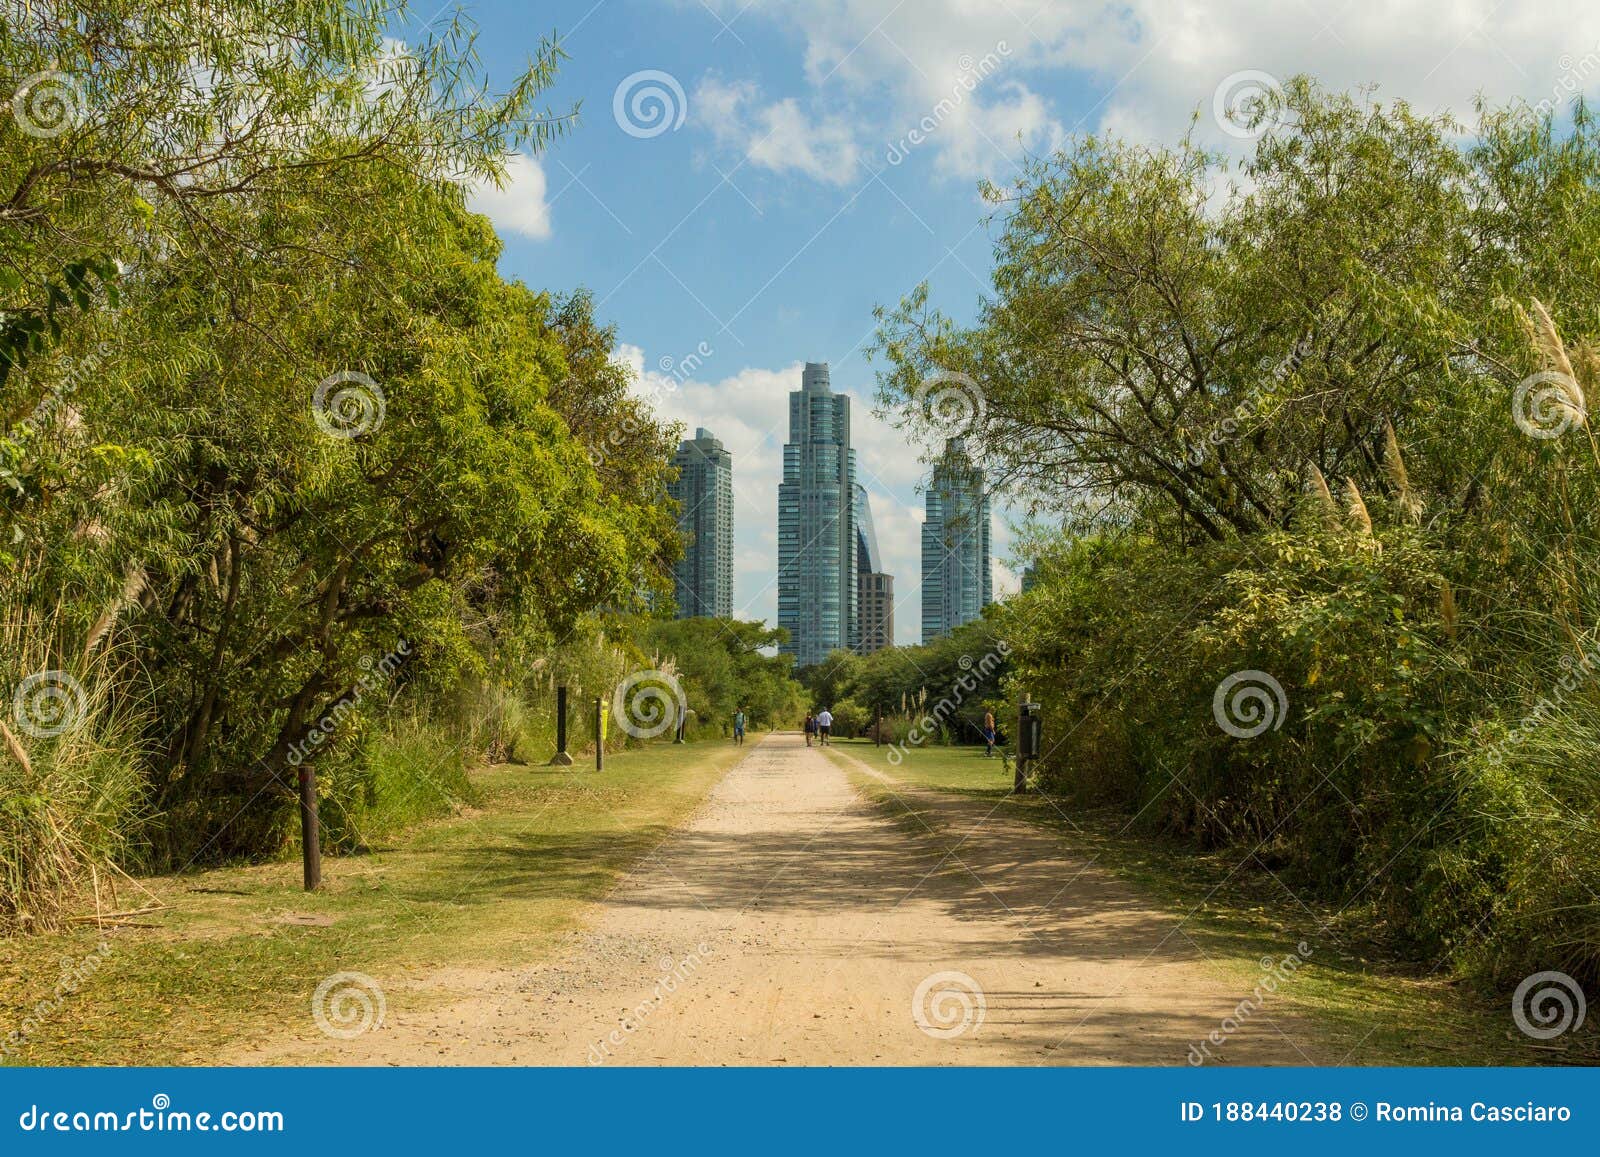 natural view landscape of the costanera sur ecological reserve. urban background on sunny day with blue sky and clouds.